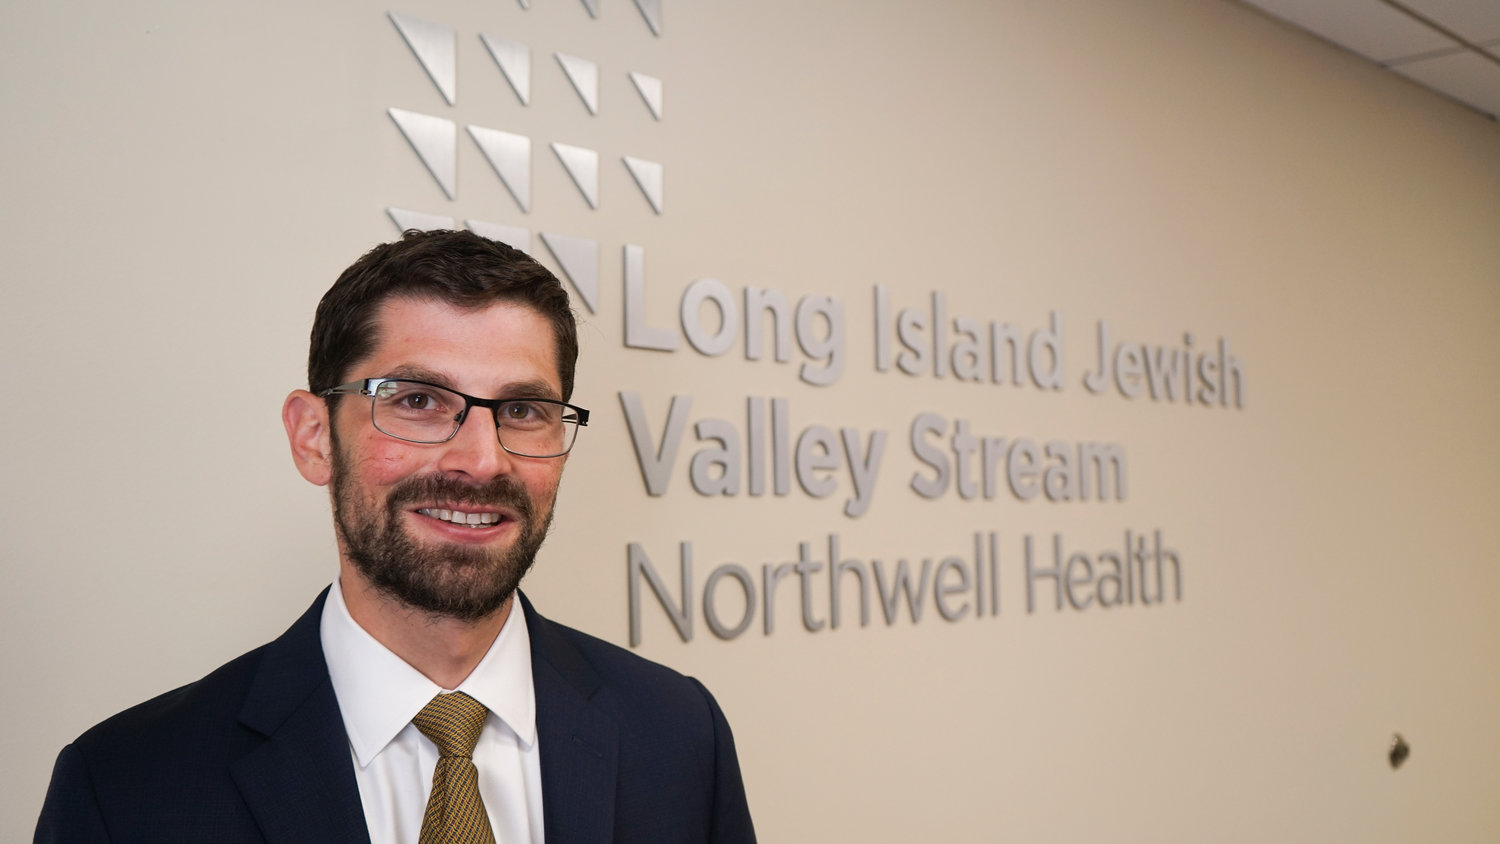 After years in the health care industry, David Seligman completed his first week as executive director of LIJ Valley Stream on July 12.